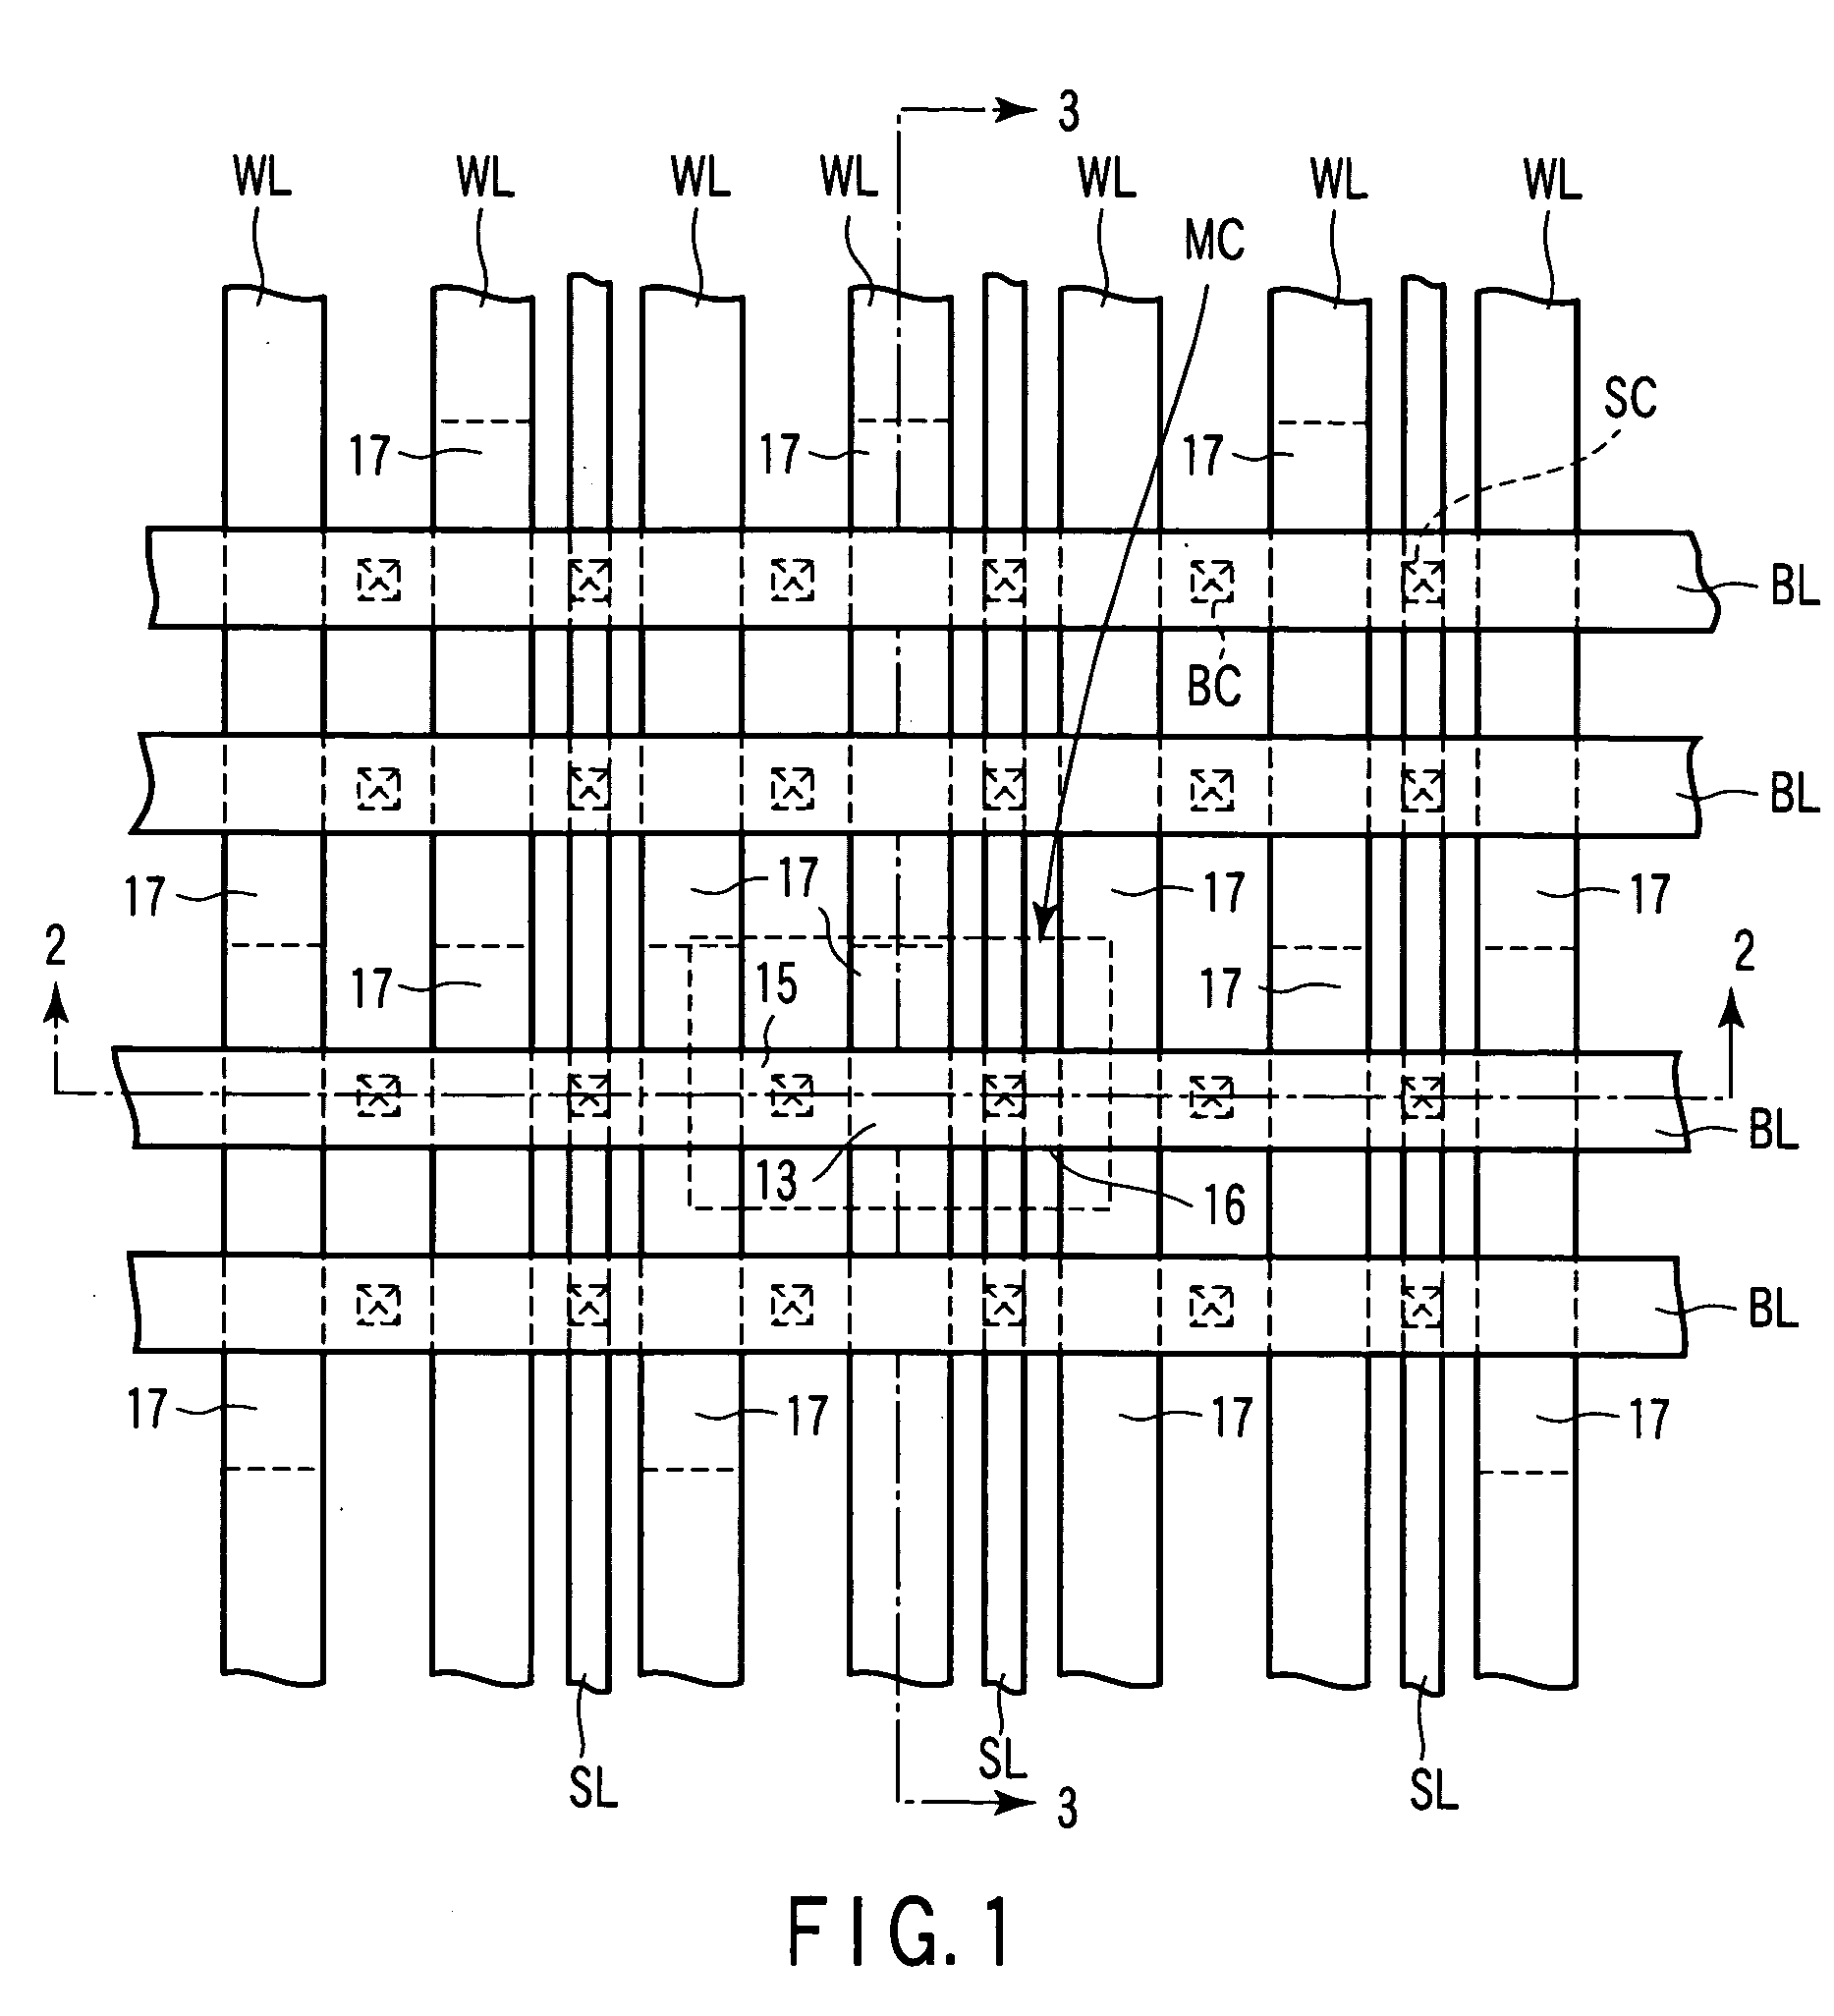 Semiconductor memory device for dynamically storing data with channel body of transistor used as storage node